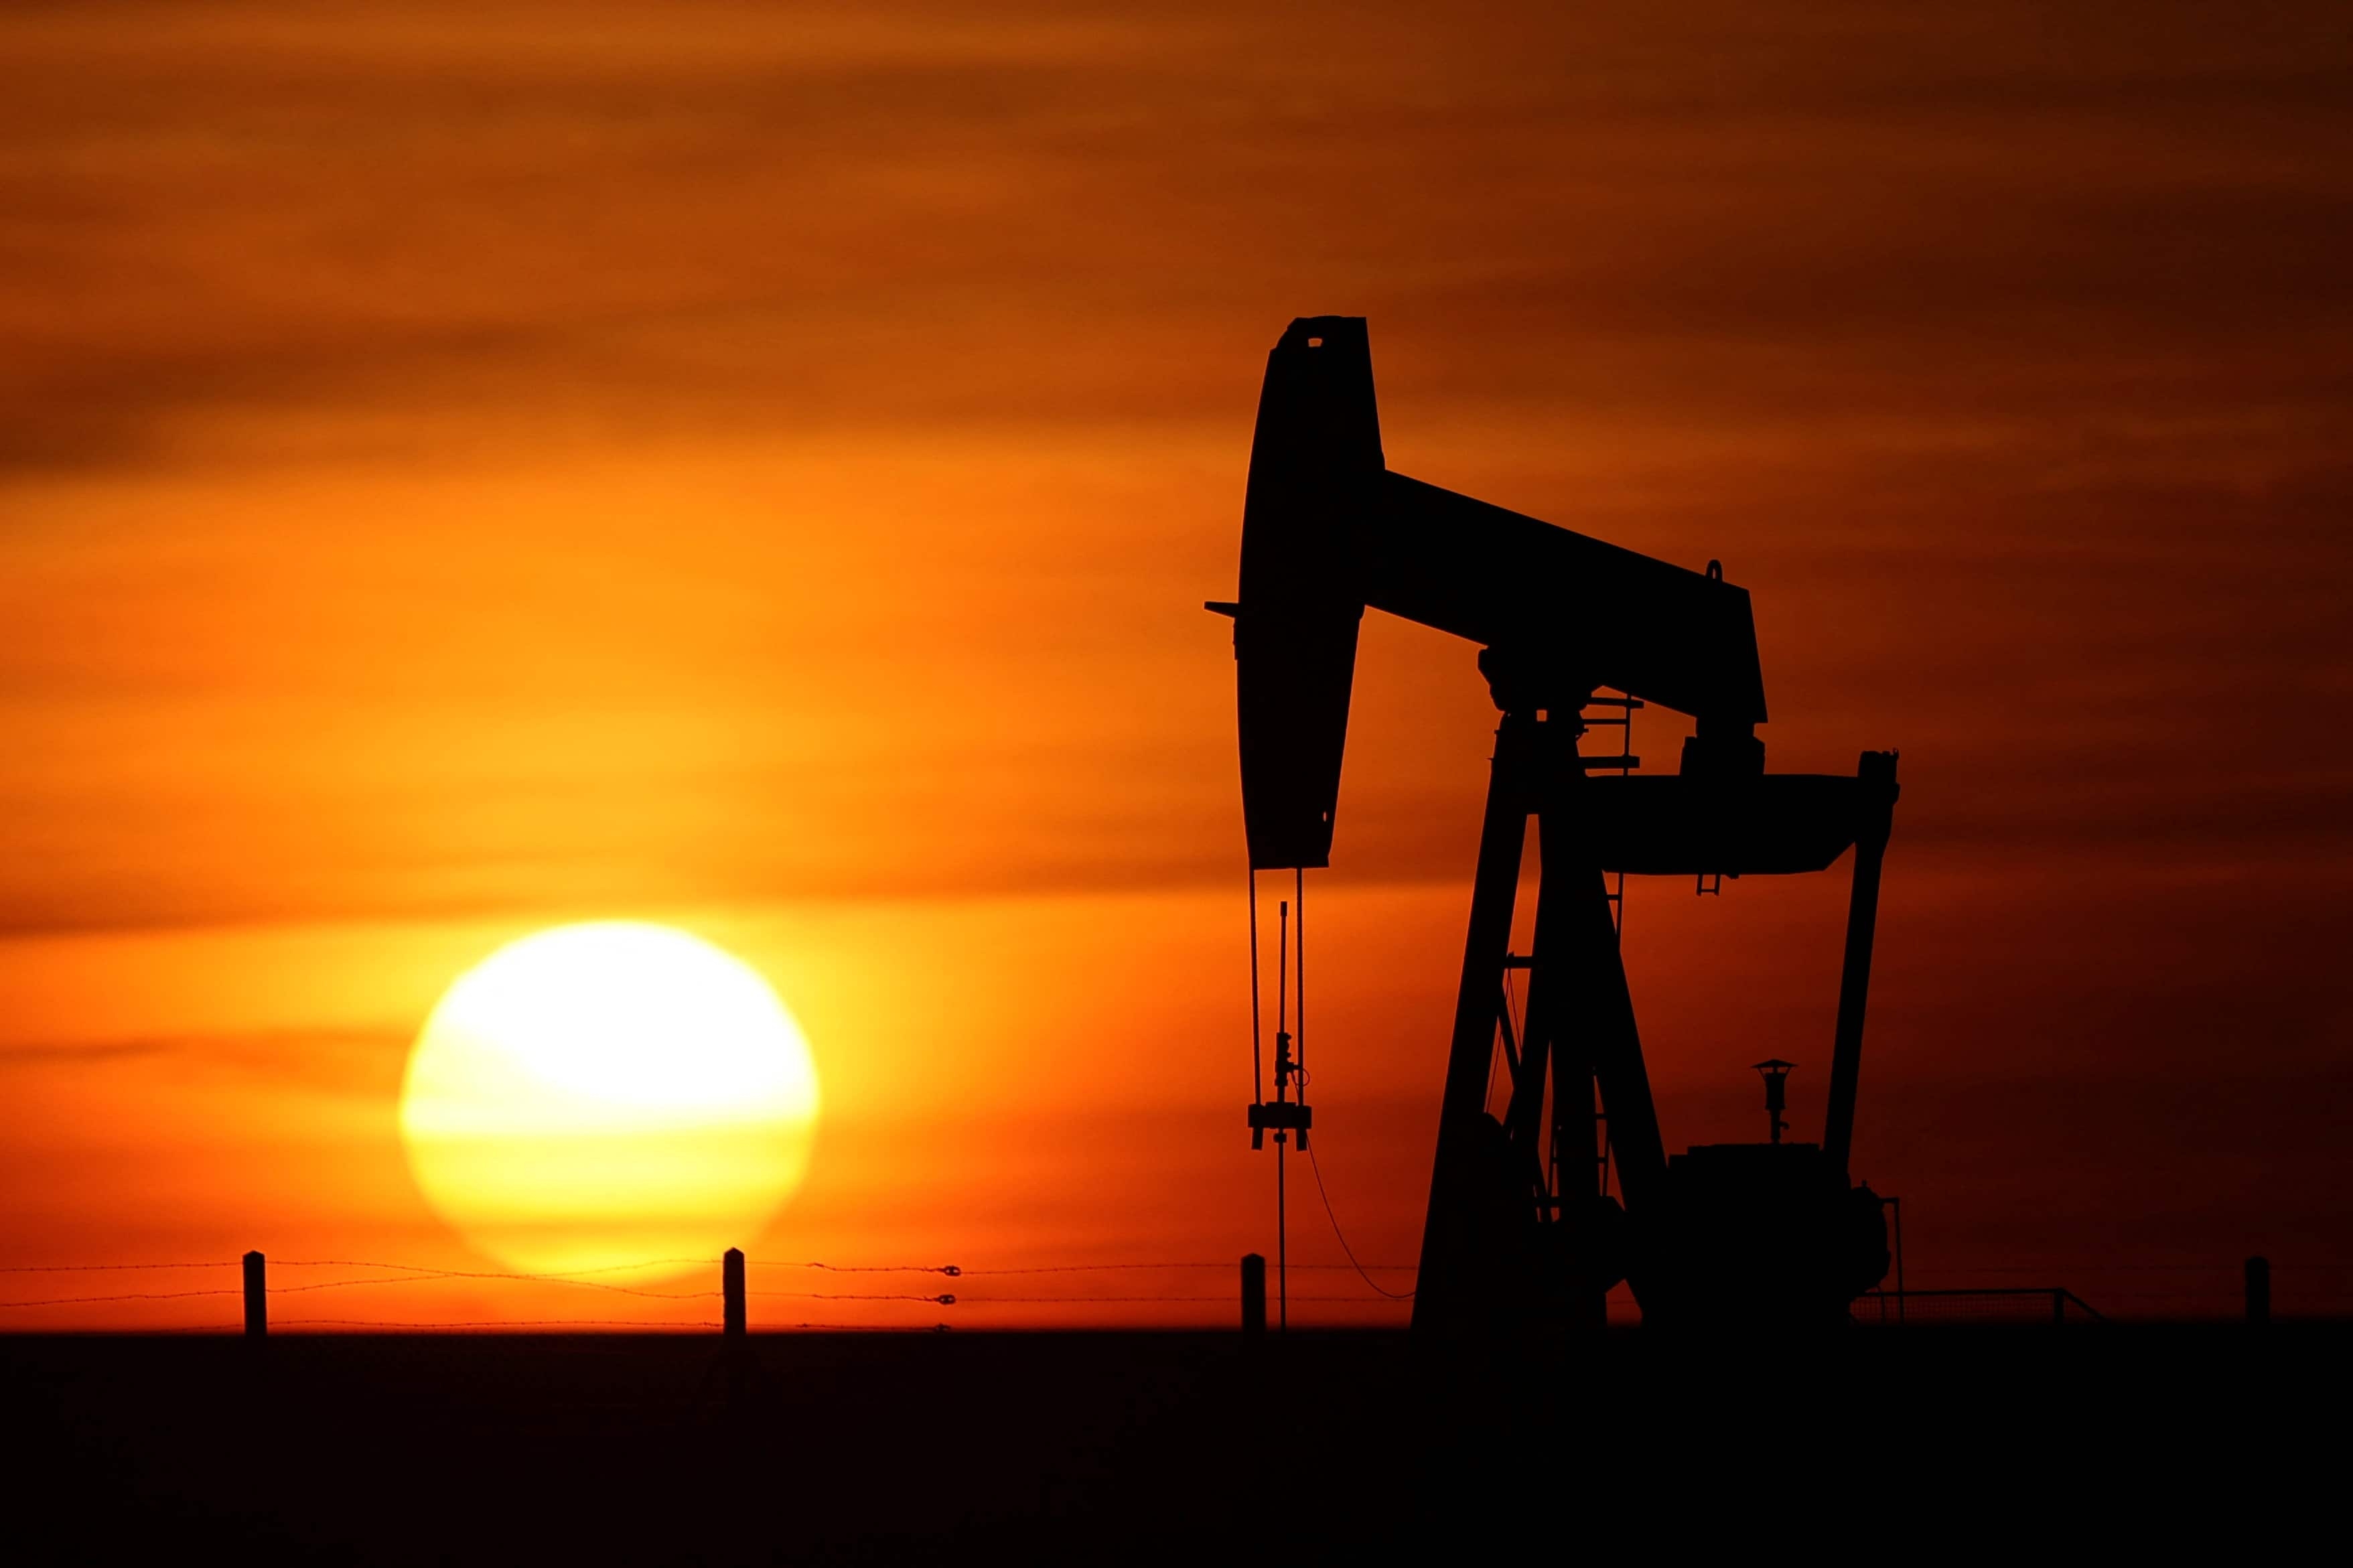 Oil prices extended their rally on Thursday, with Brent rising above $116 a barrel, as trade disruption and shipping issues from Russian sanctions over the Ukraine crisis sparked supply worries while U.S. crude stocks fell to multi-year lows. Brent crude futures rallied to $116.83 a barrel, the highest since August 2013. The contract was at $116.60 a barrel, up $3.67 by 0112 GMT. US West Texas Intermediate crude was at $113.01 a barrel, up $2.41 after touching a fresh 11-year high of $113.31 a barrel.